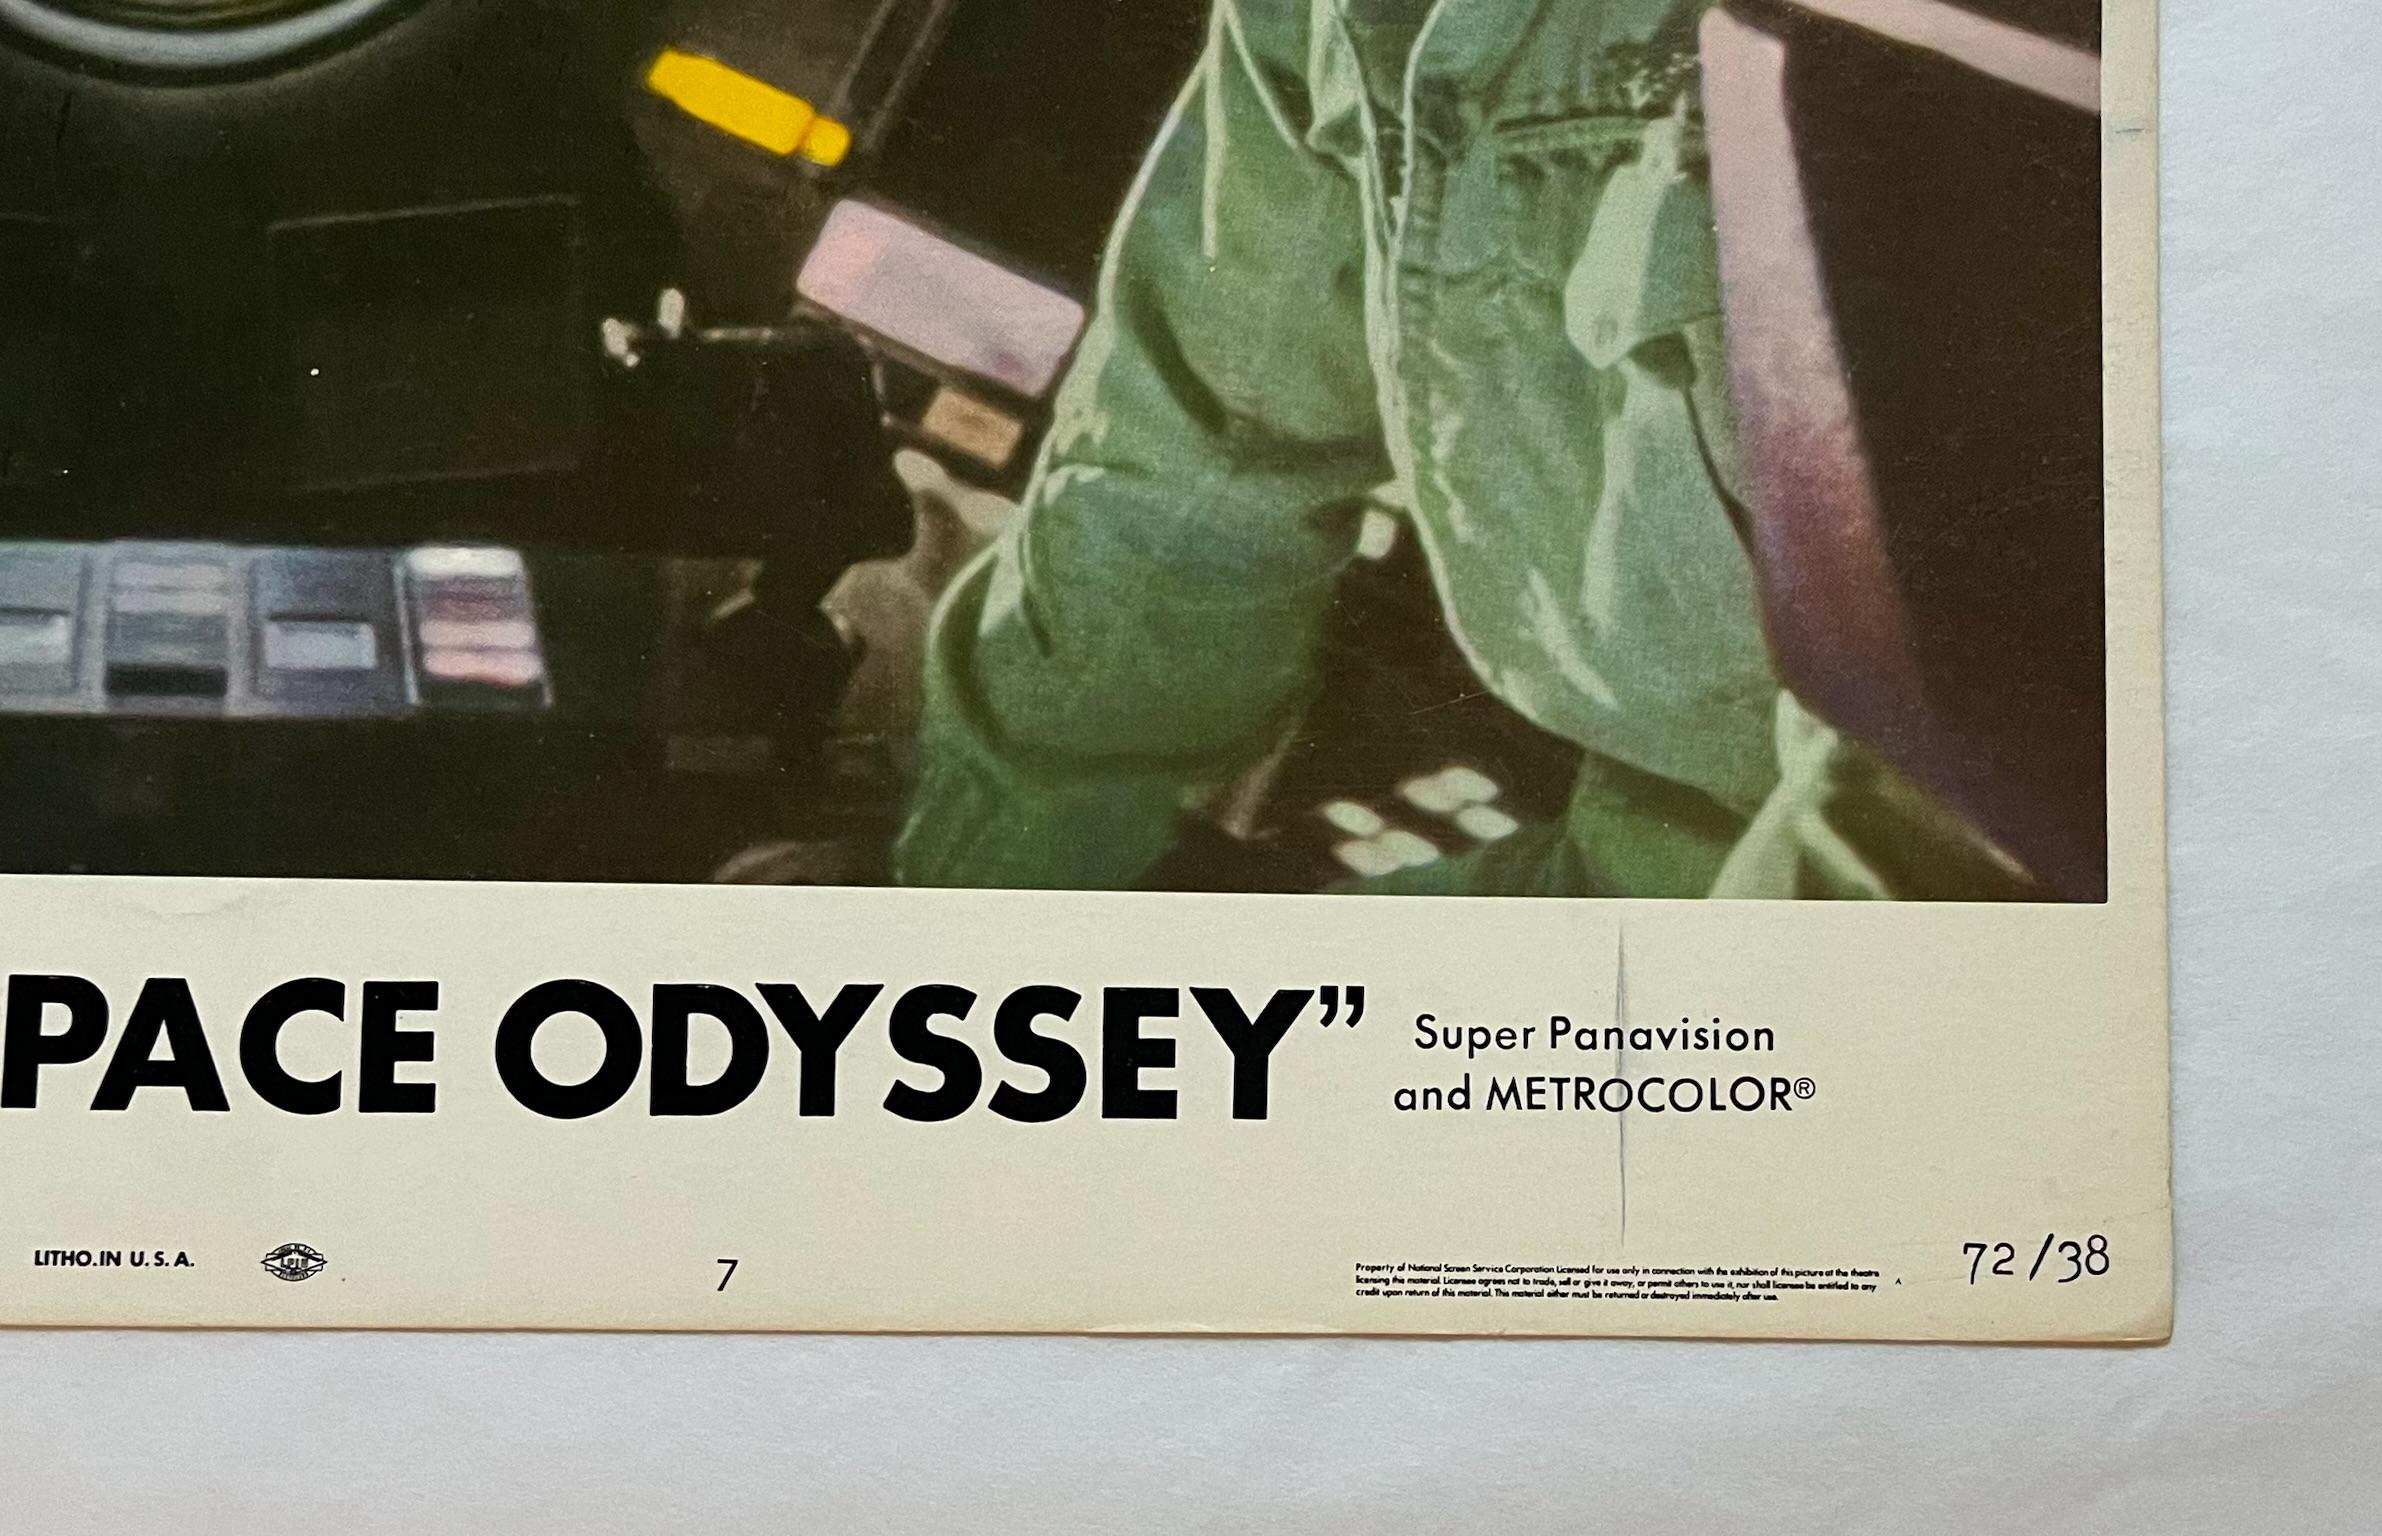 2001: A Space Odyssey - Original 1968 Lobby Card #7

Vintage 2001: A Space Odyssey Lobby Card: 
After uncovering a mysterious artifact buried beneath the Lunar surface, a spacecraft is sent to Jupiter to find its origins: a spacecraft manned by two